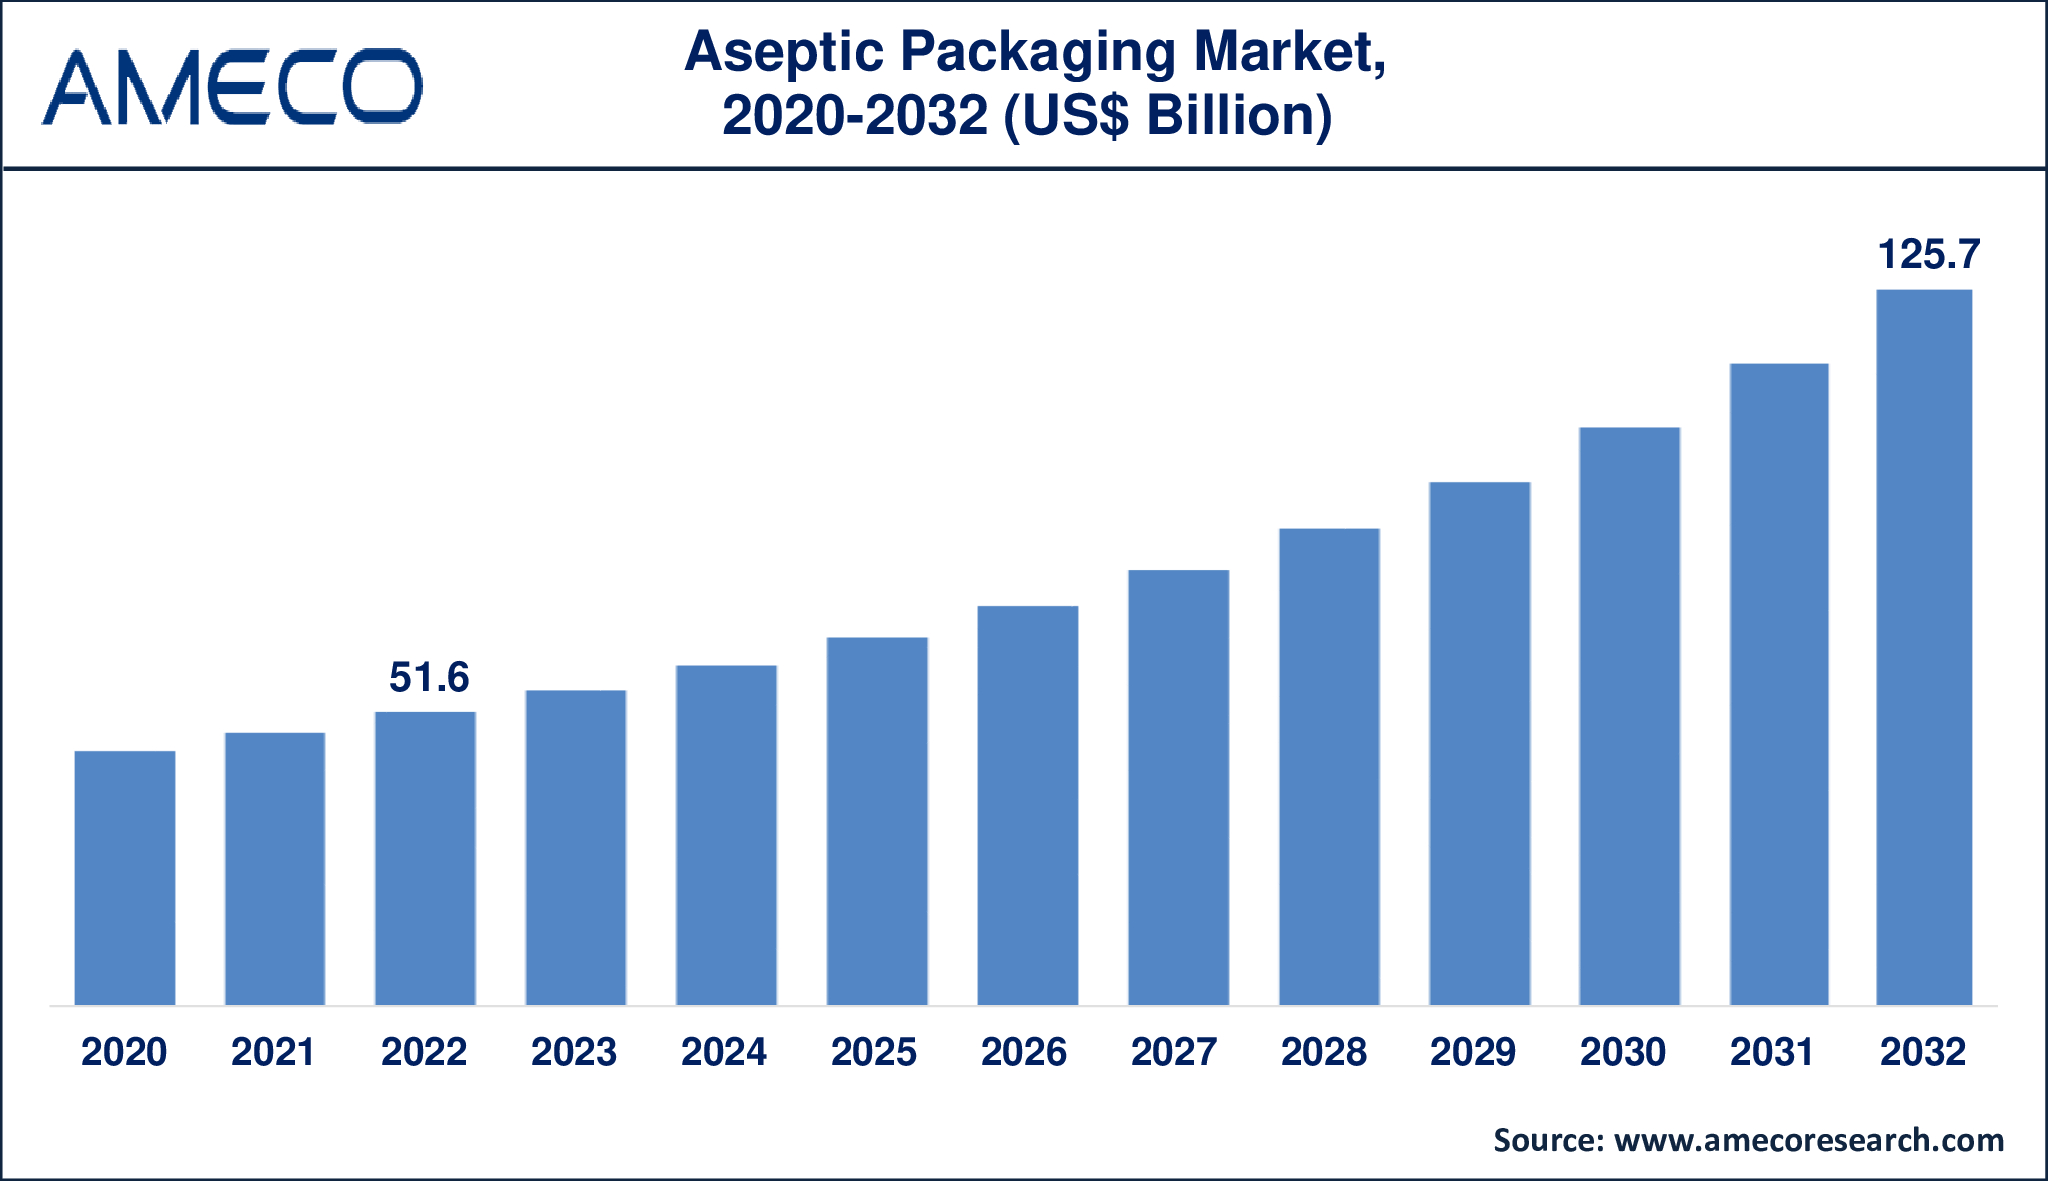 Aseptic Packaging Market Dynamics